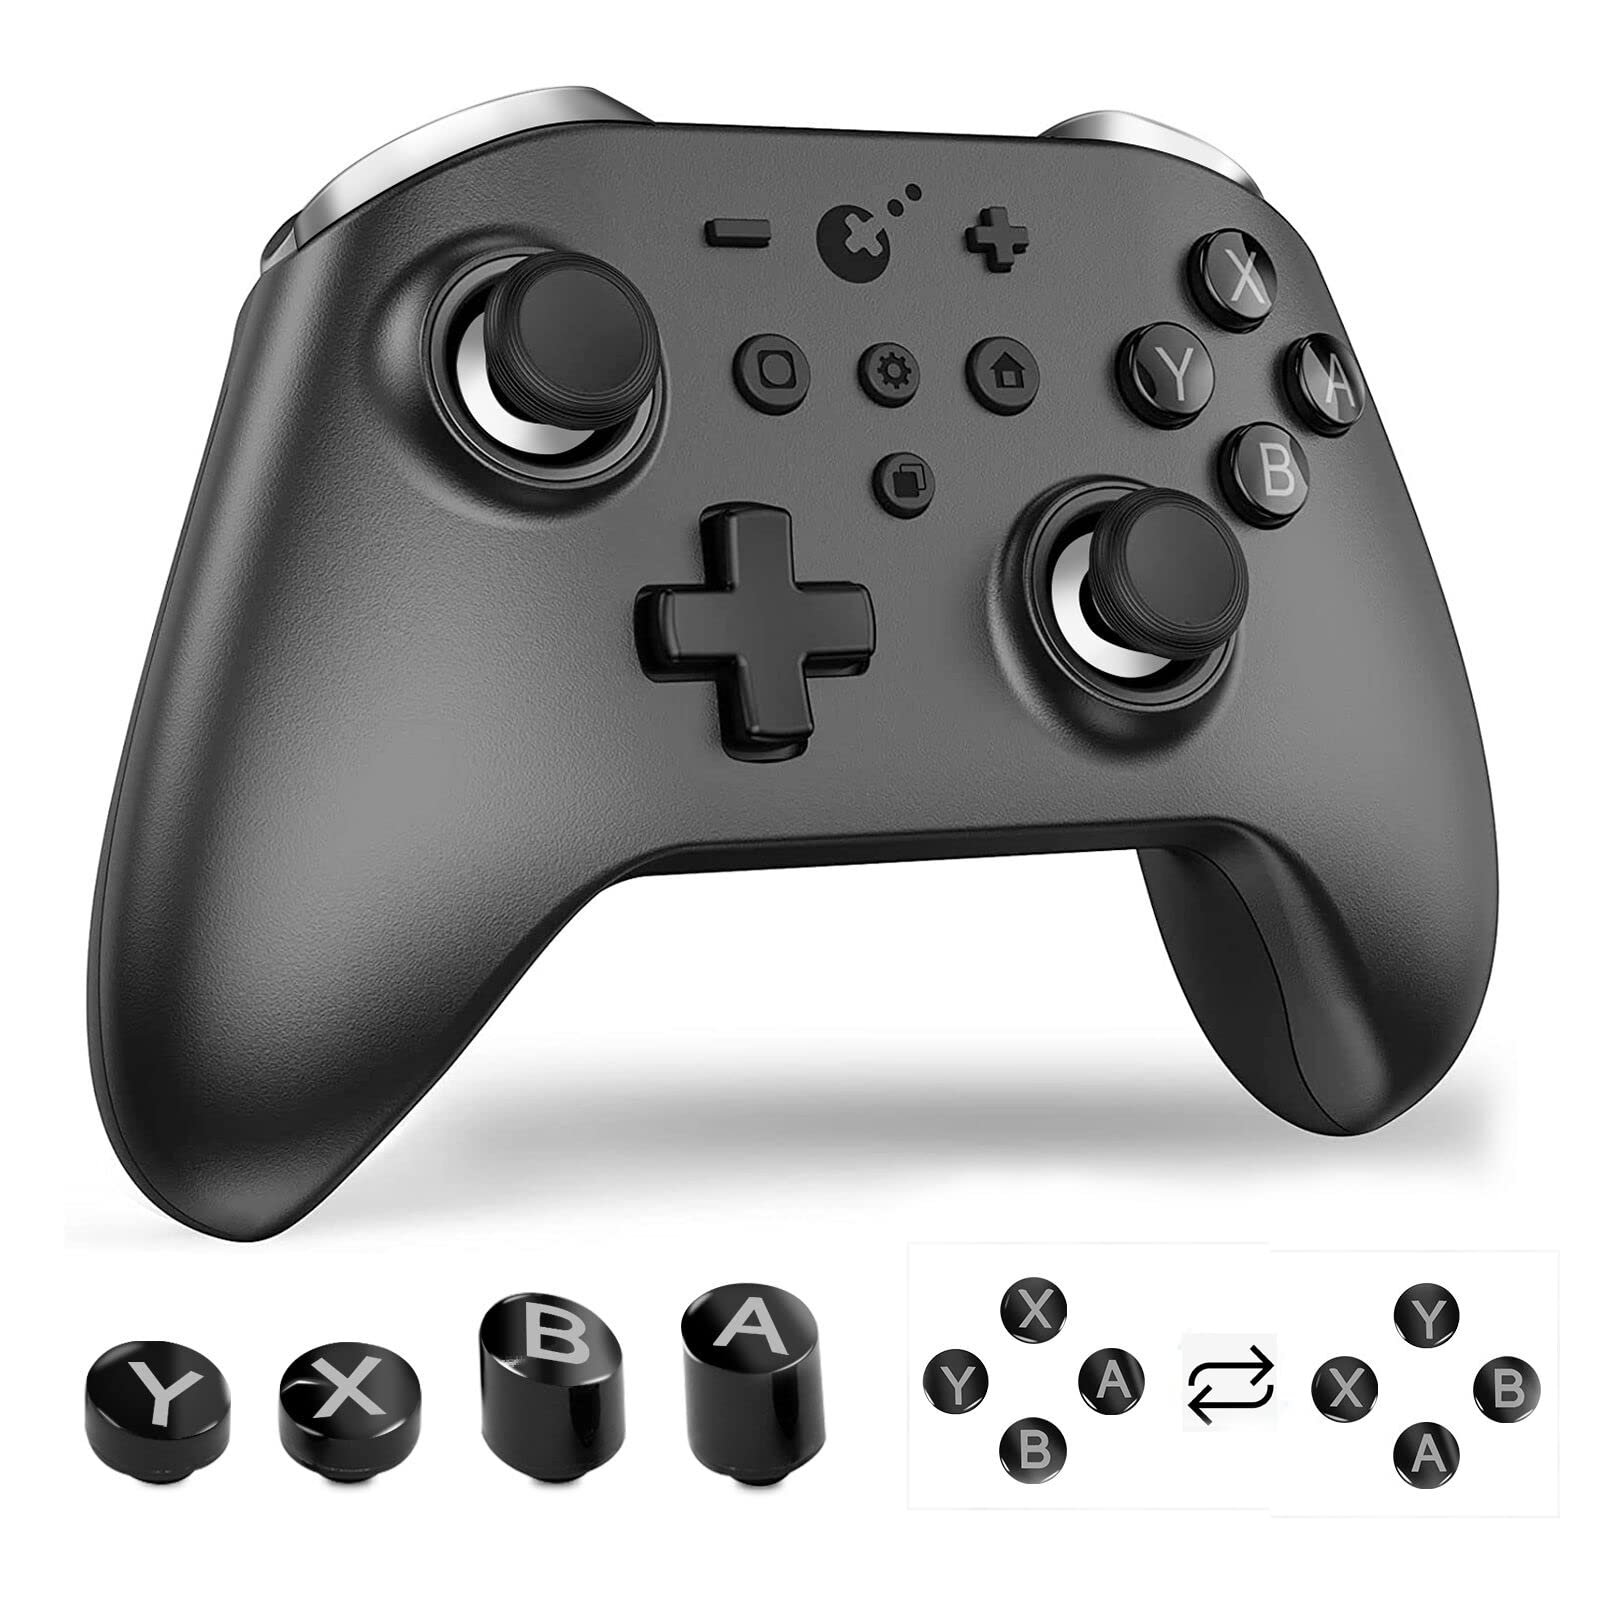 GuliKit KingKong 2 Pro Controller, Hall Joystick Bluetooth Wireless Controller for Switch/Switch OLED/PC/Android/MacOS/IOS/Steam Deck - No Deadzone, No Drifting, APG Button, Vibration- Black